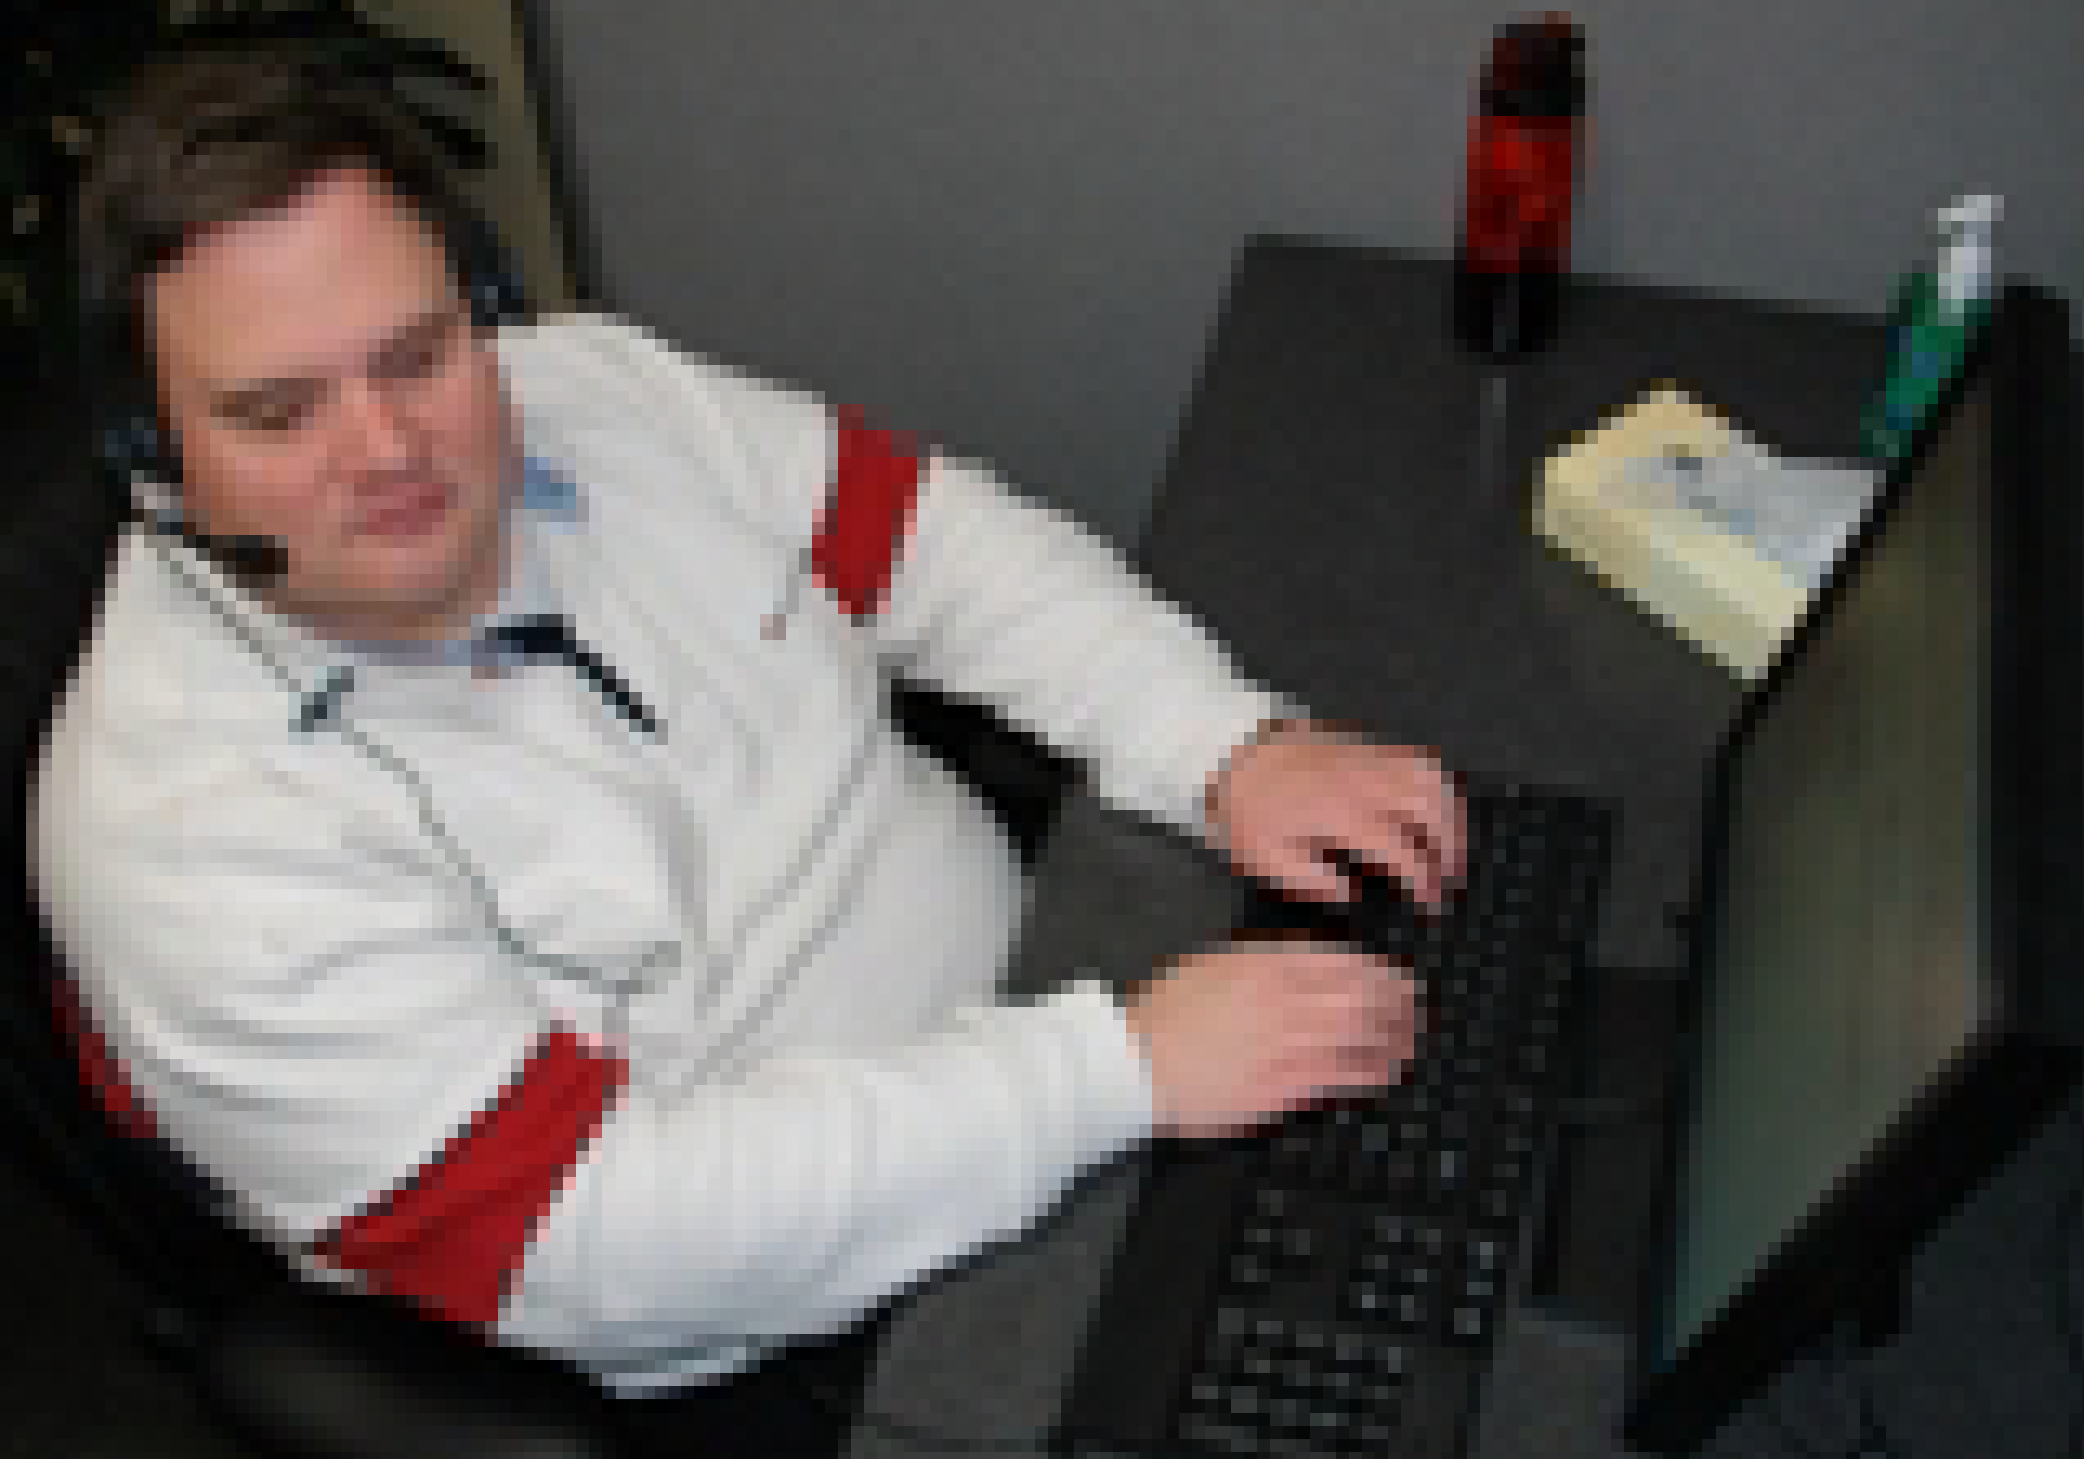 Steven, adorned with his headset, working at his computer.